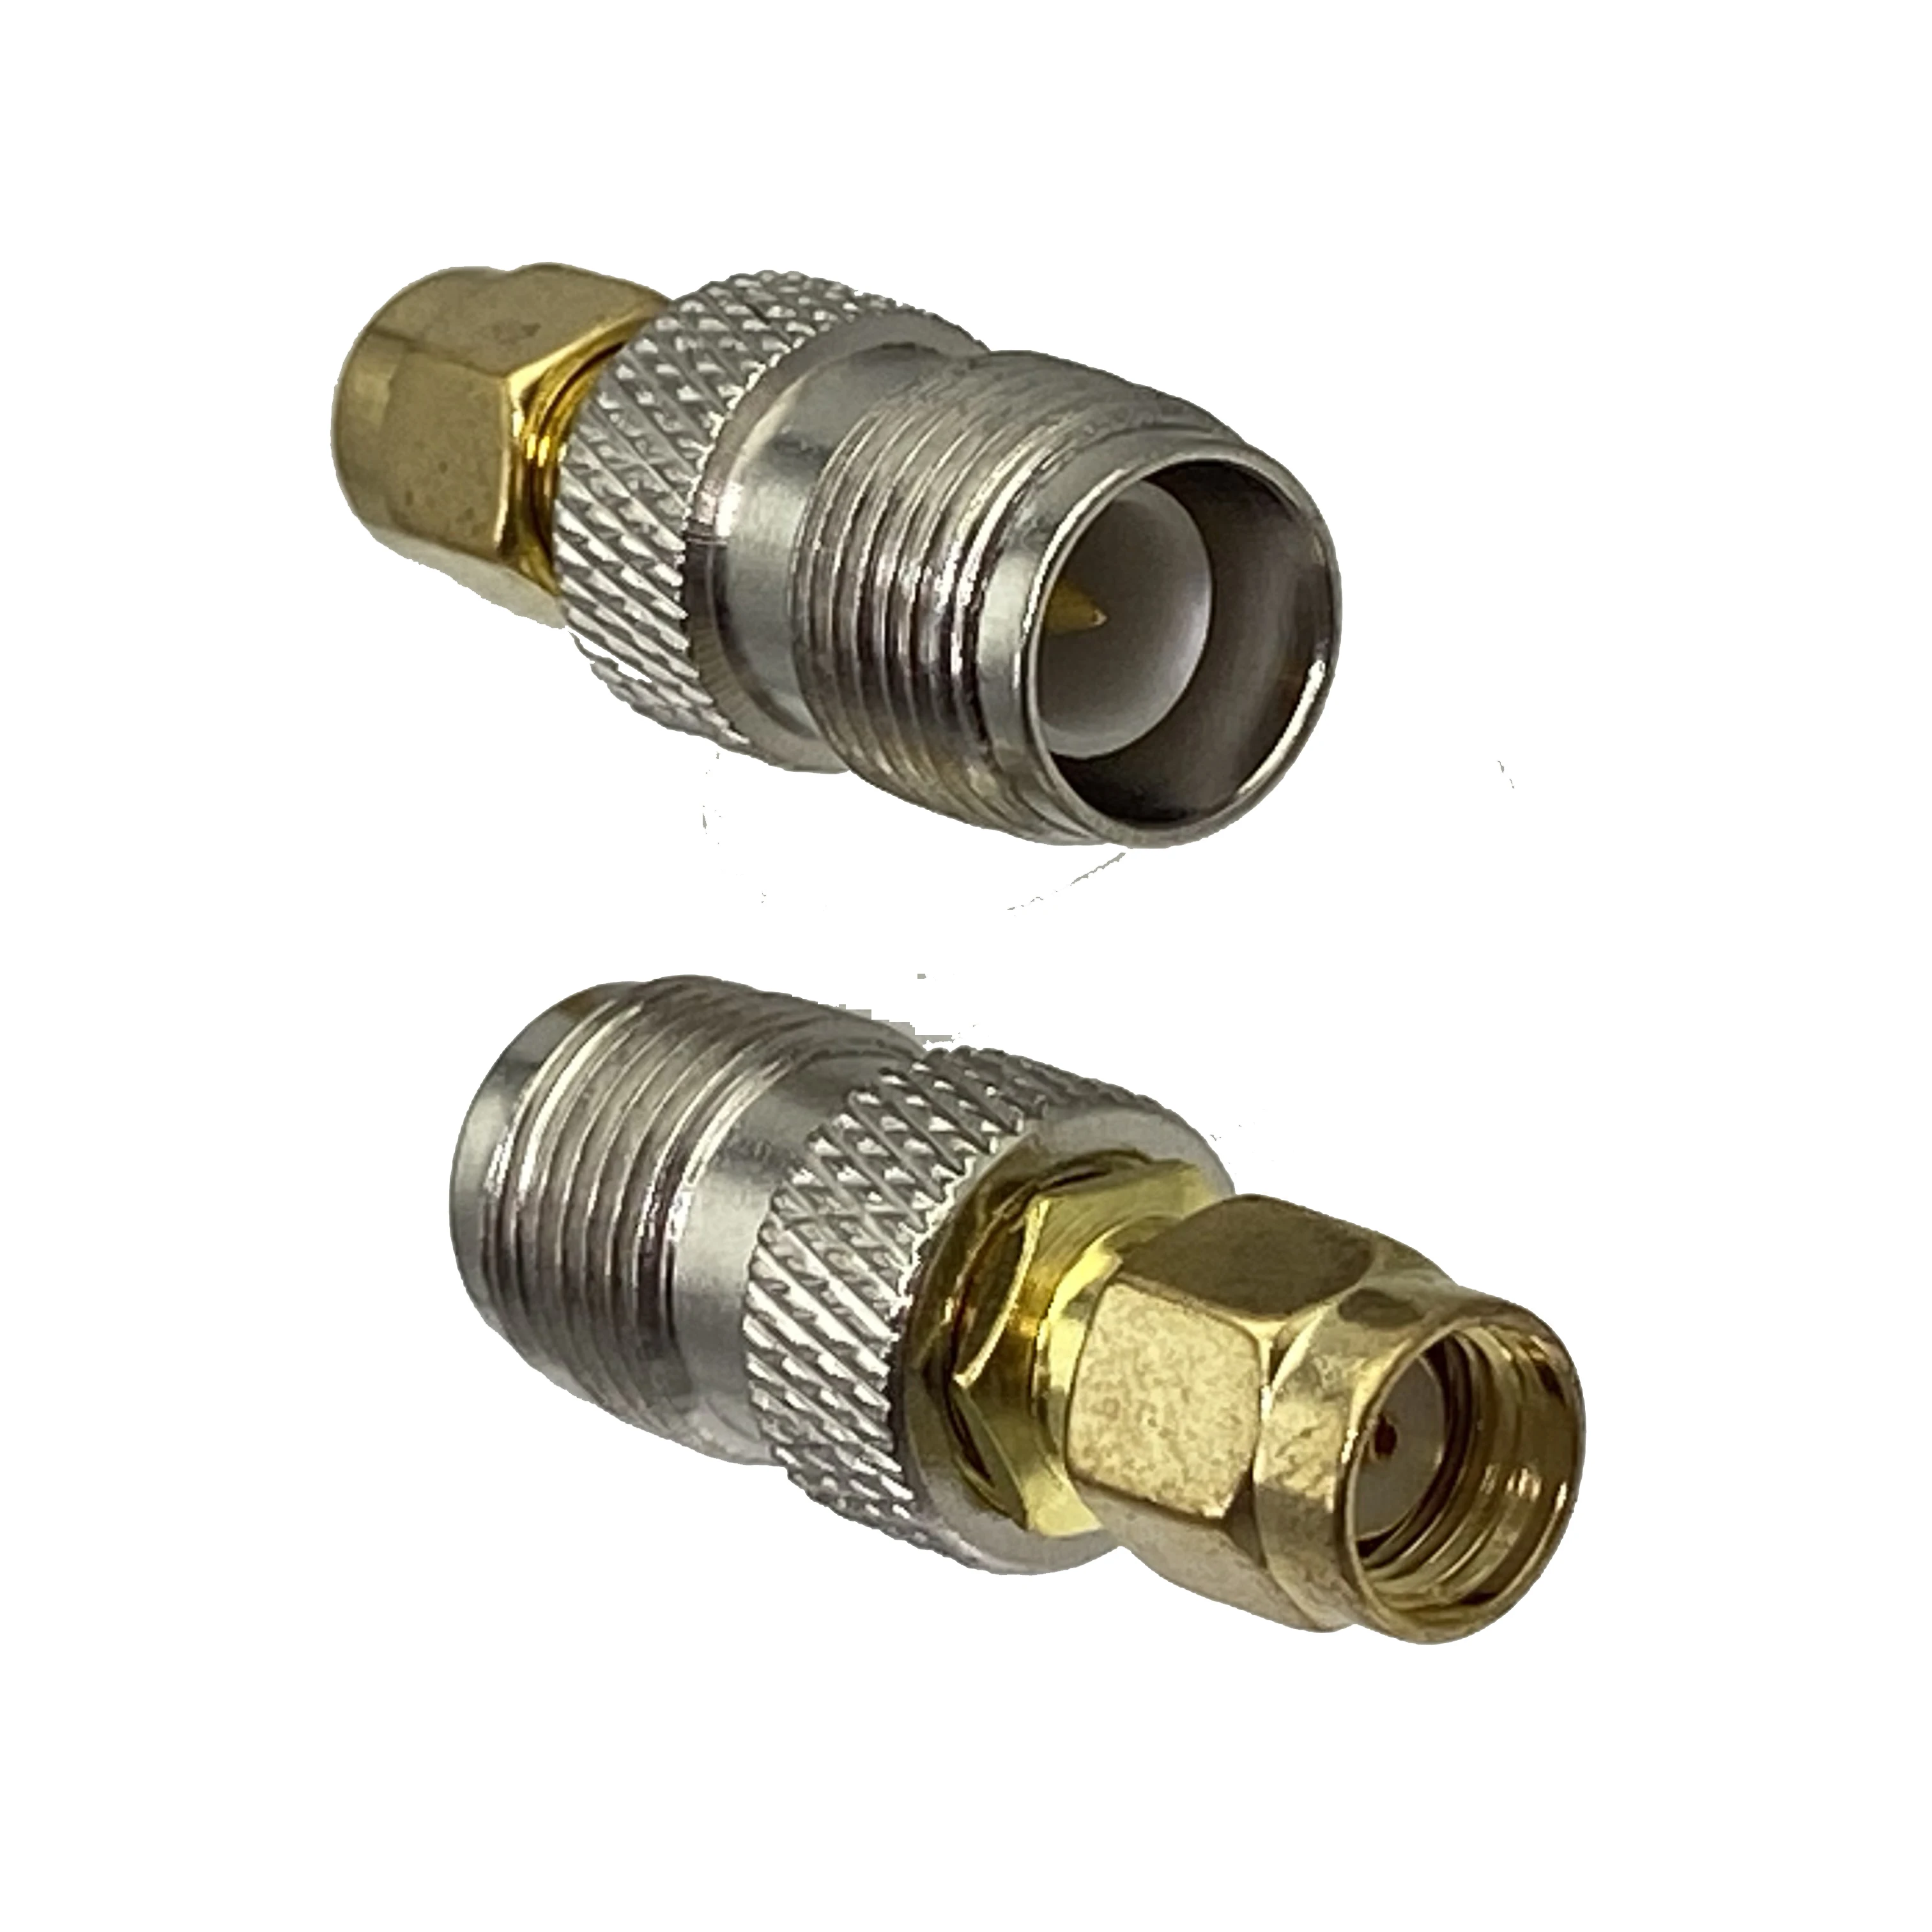 

1pcs Connector Adapter RP TNC Female Plug to RP SMA Male Jack Wire Terminal RF Coaxial Converter Straight